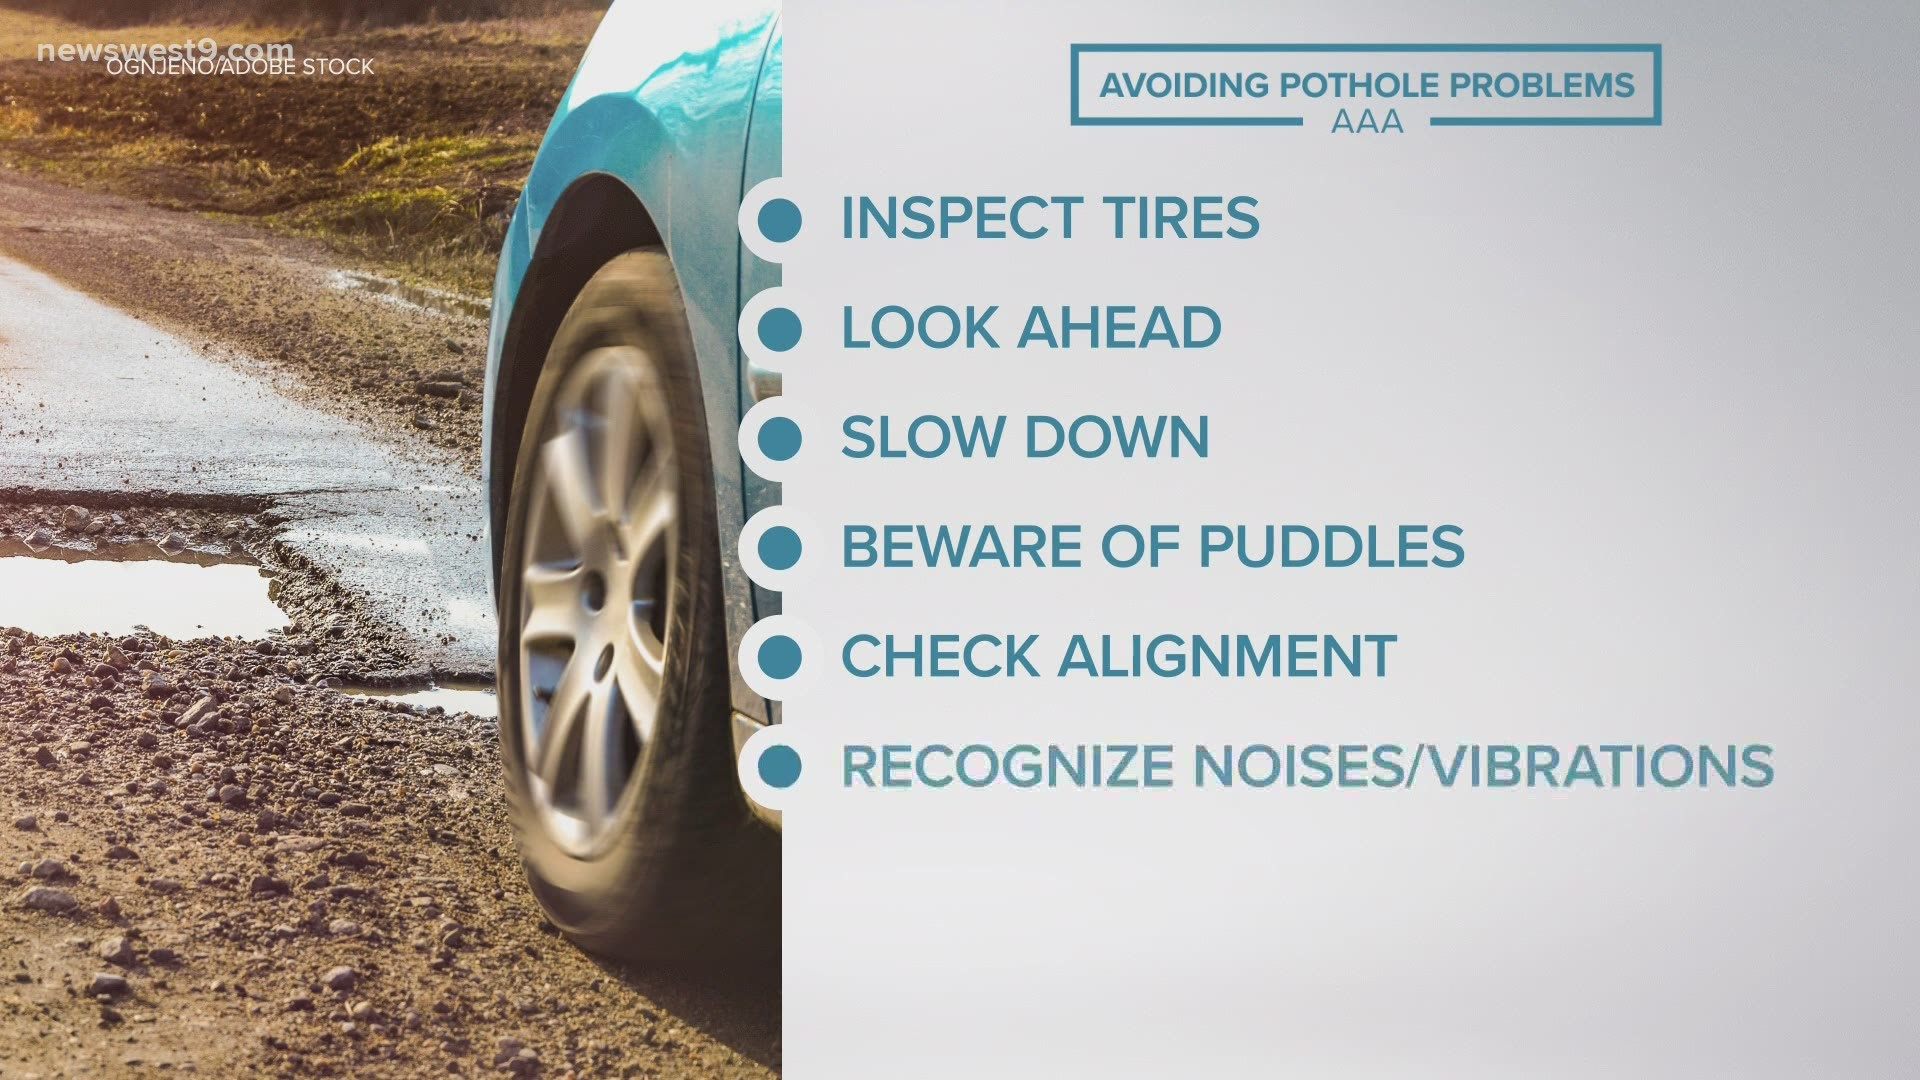 Winter weather causes increase in potholes on Permian Basin roads